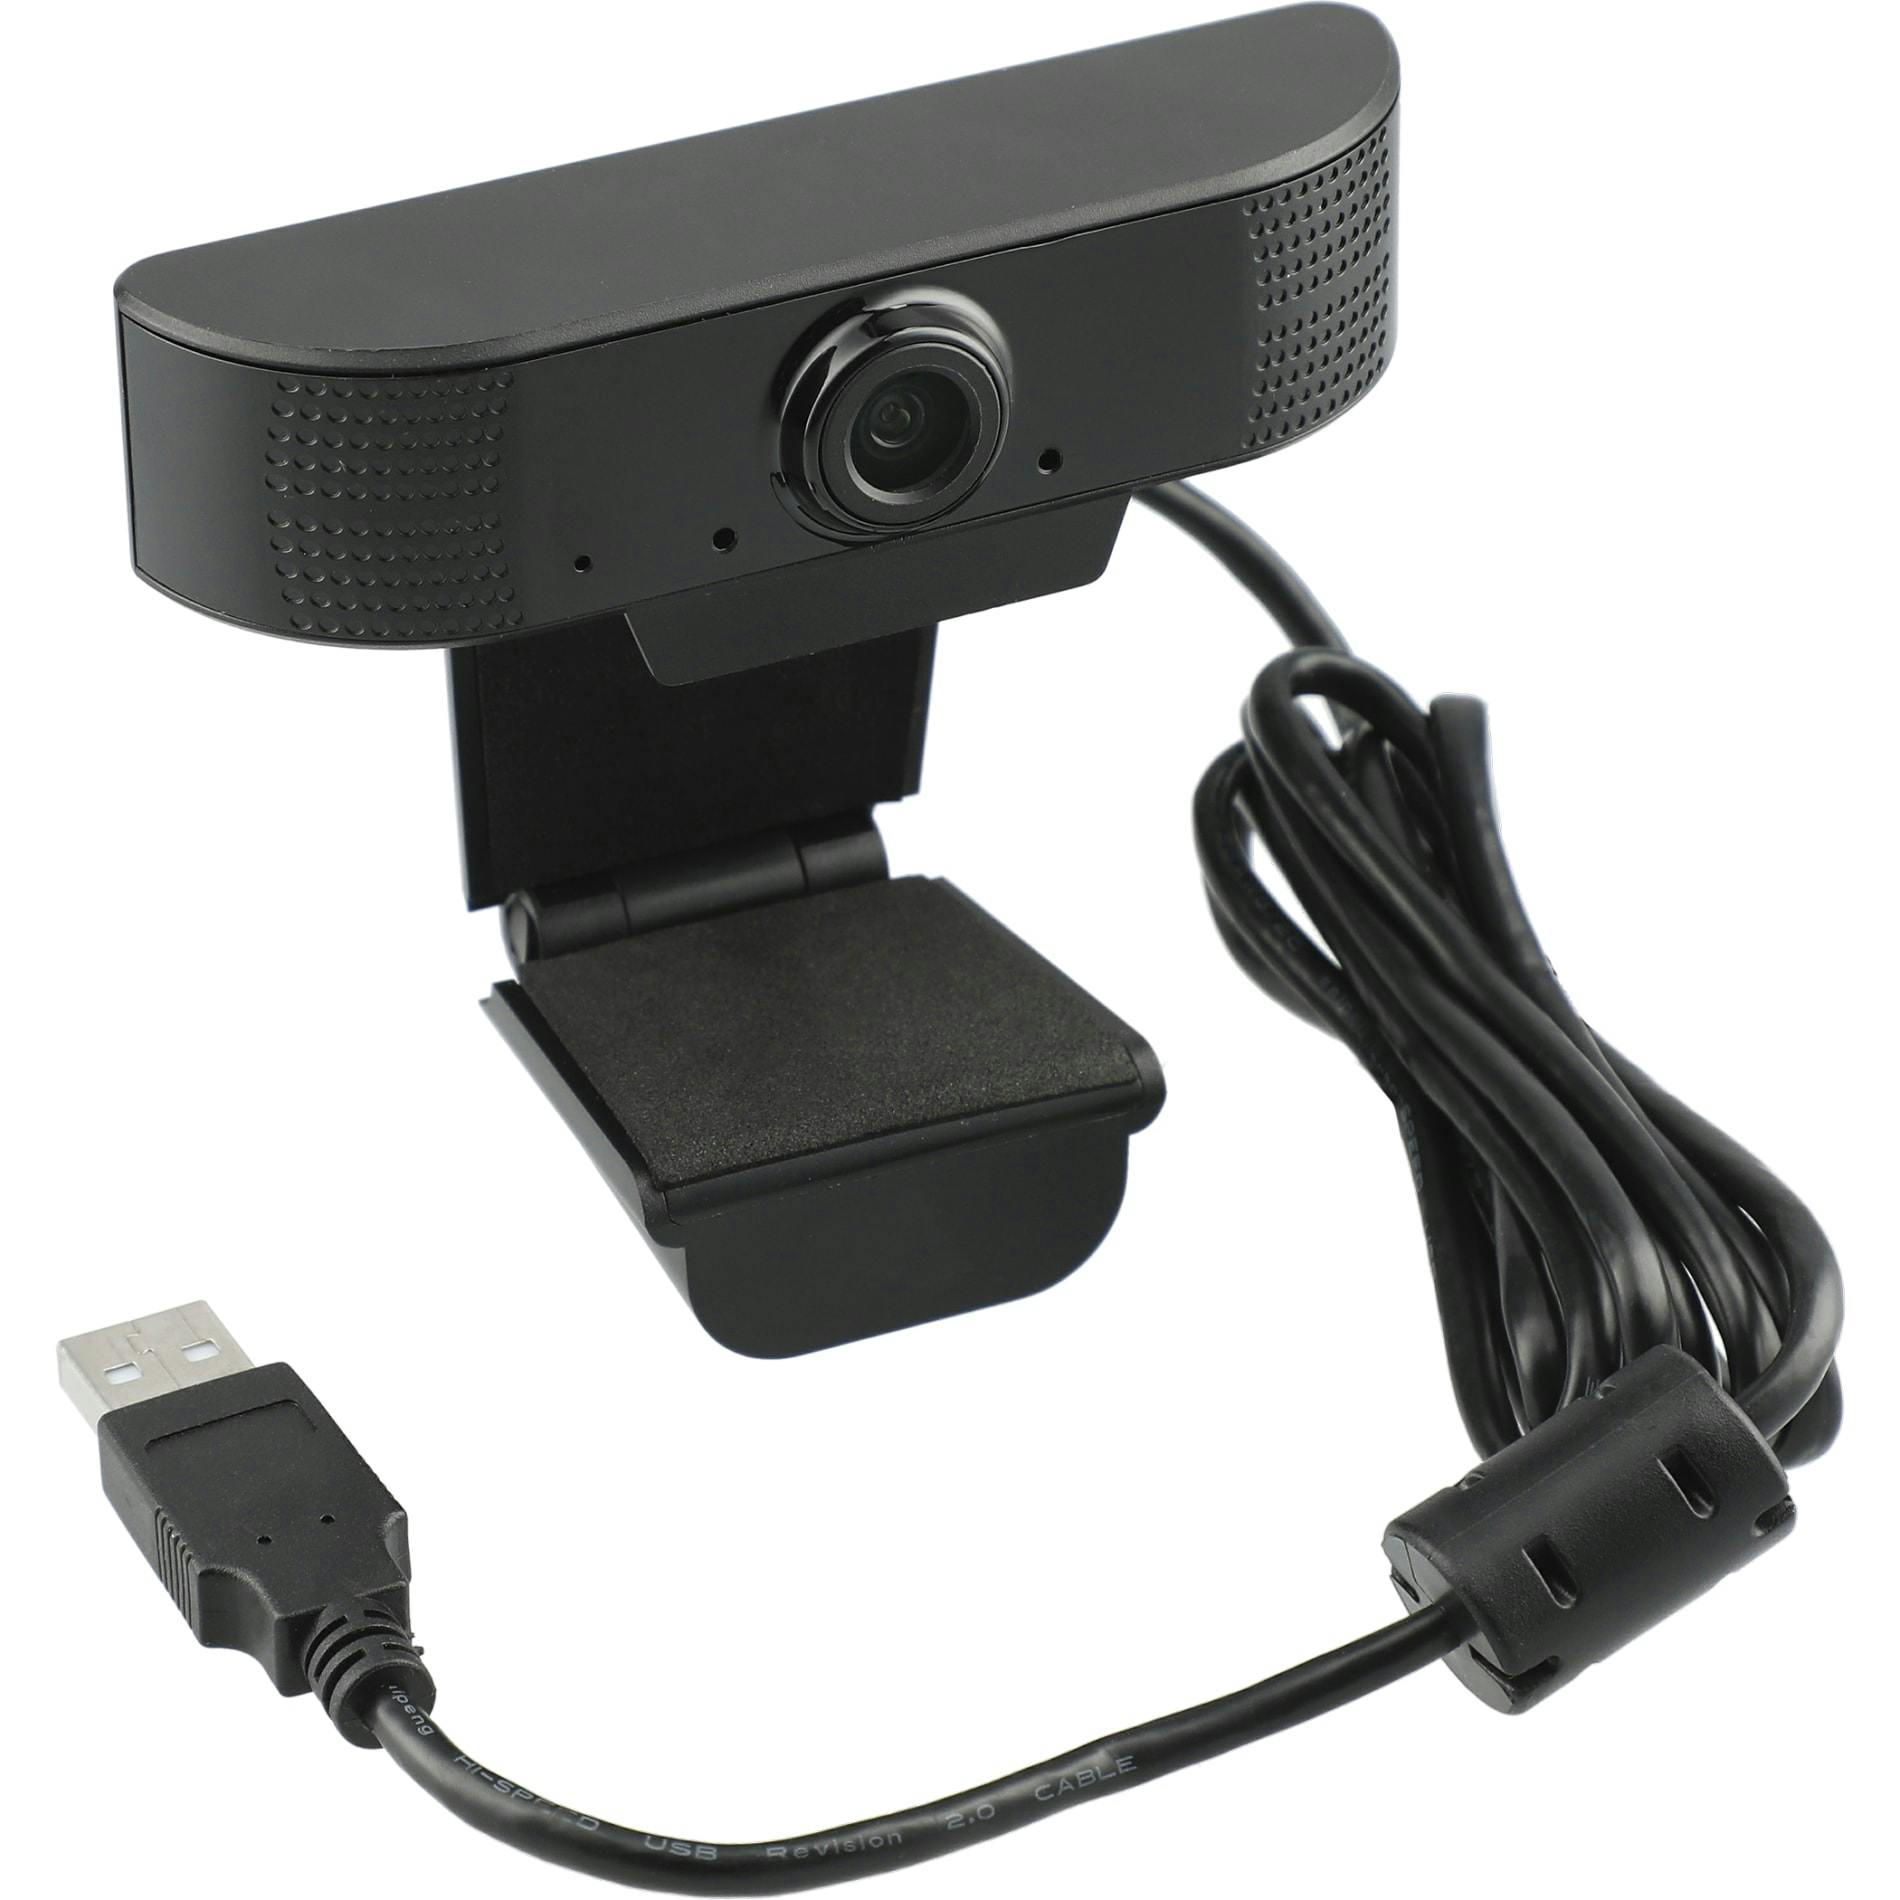 1080P HD Webcam with Microphone - additional Image 3